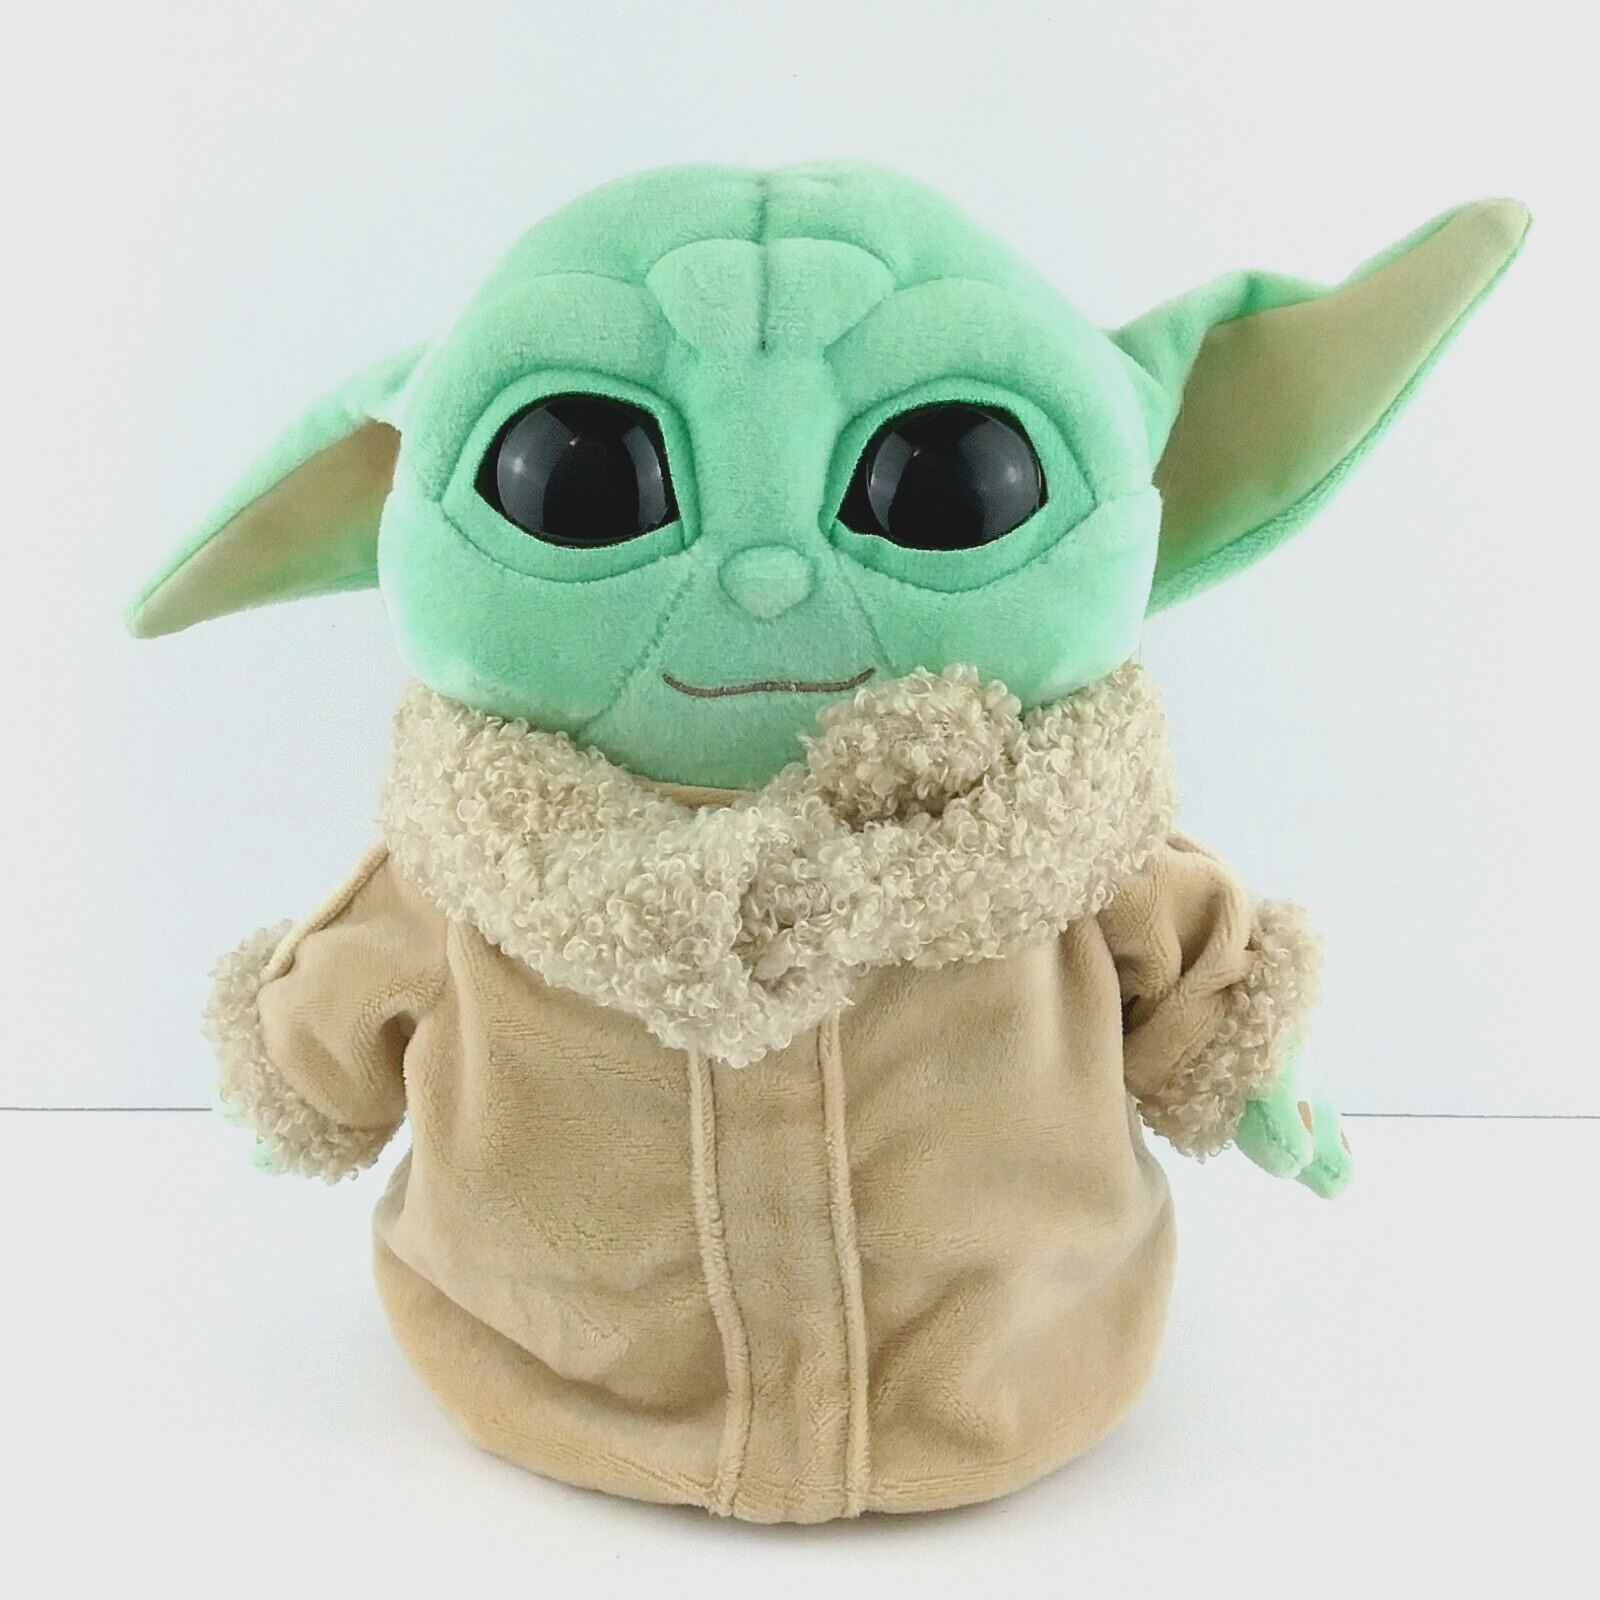 Star Wars Mandalorian The Child Yoda Plush Kids Toy by Mattel 2020 New with Tag